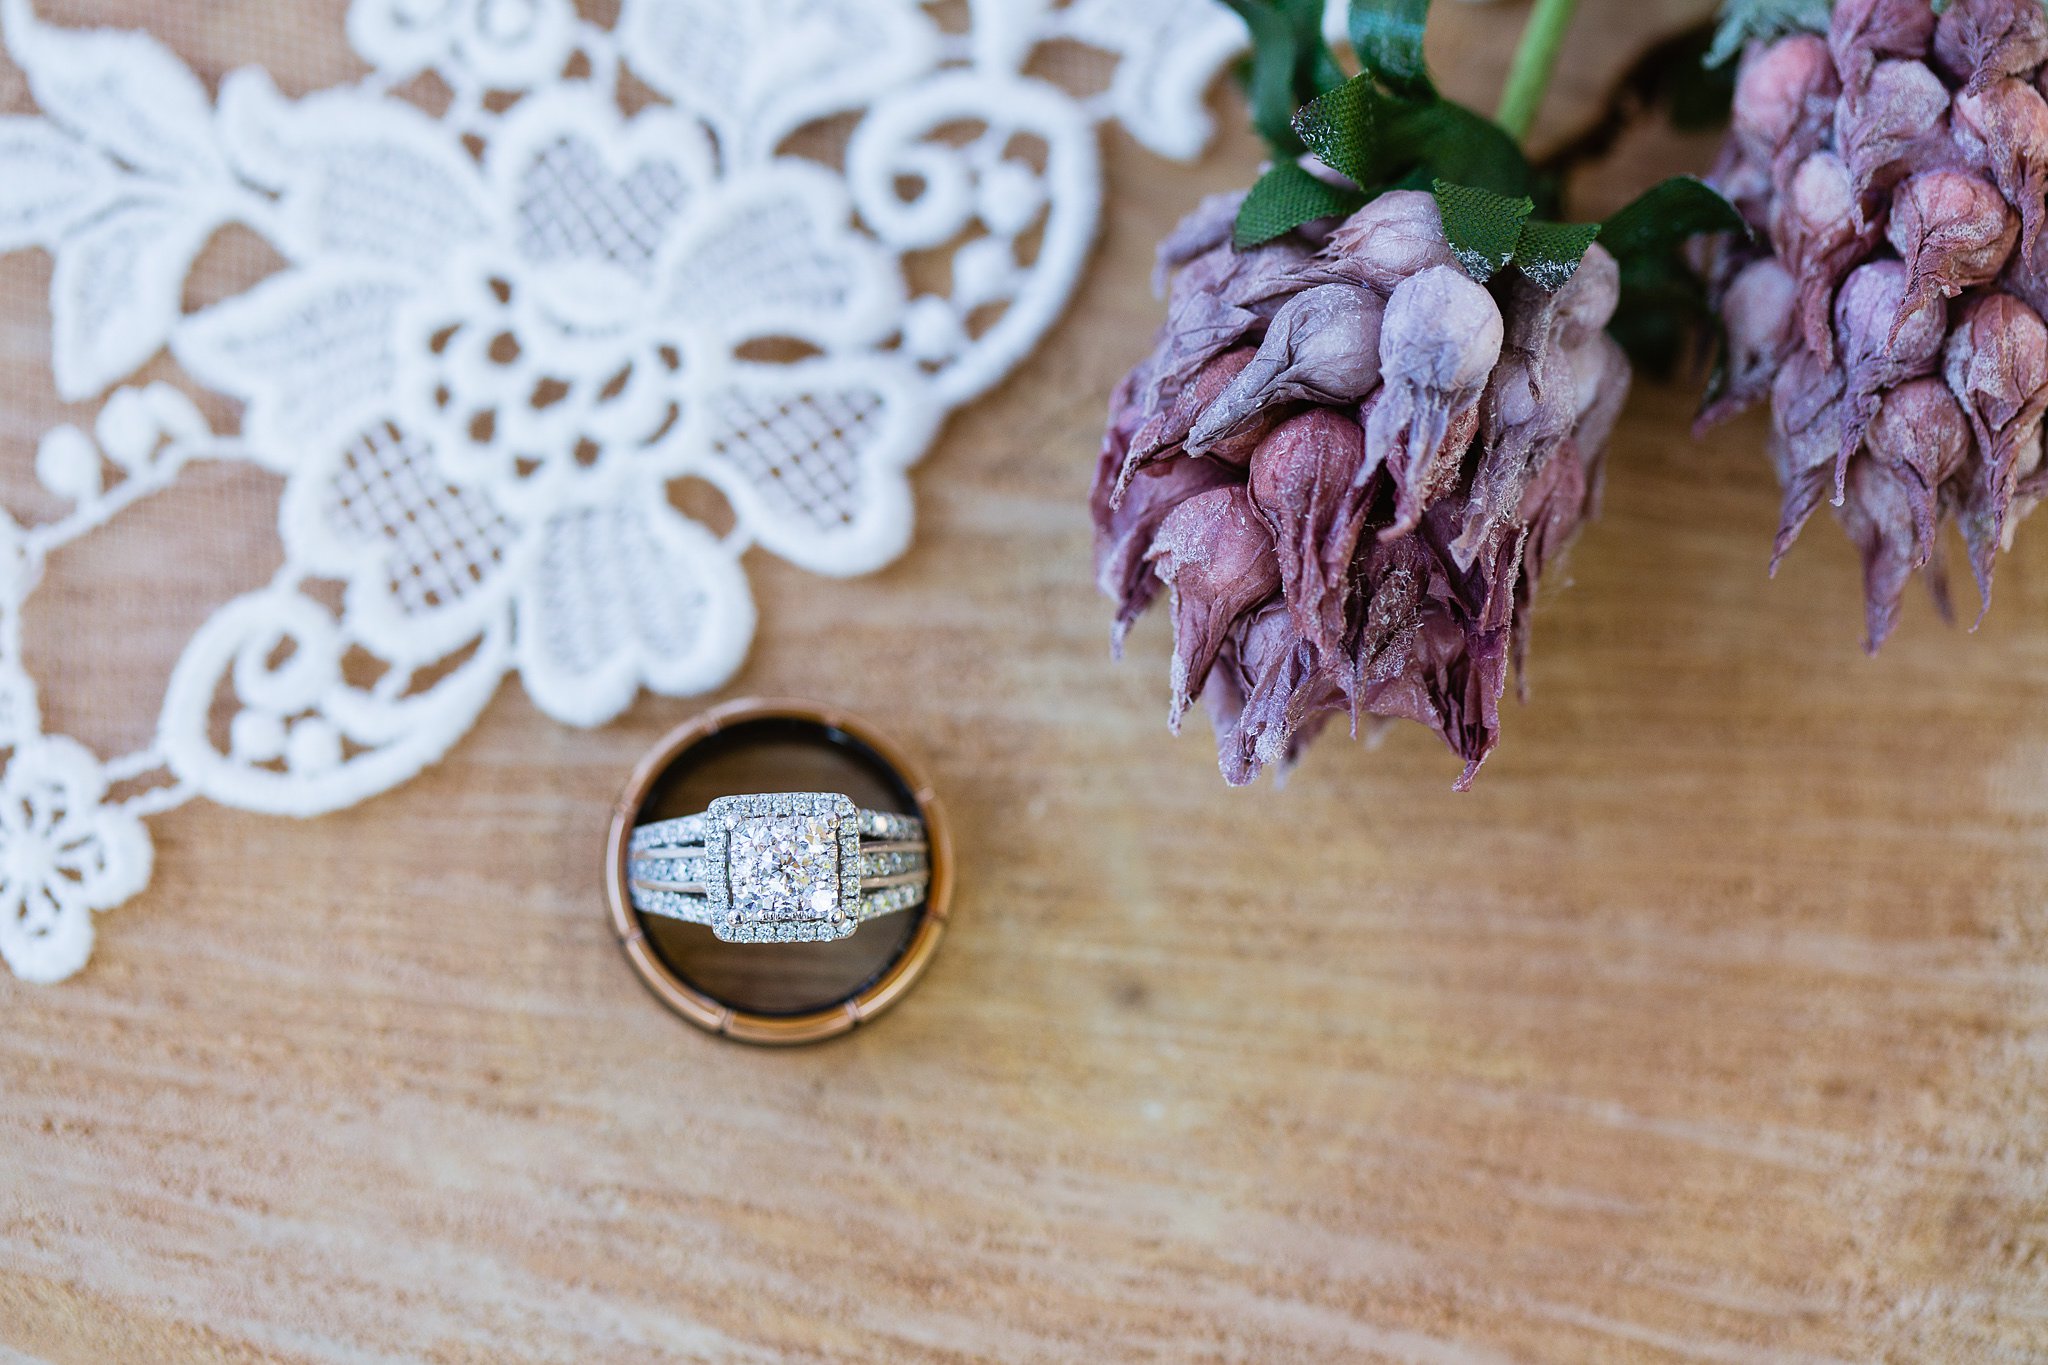 Bride and groom's wedding rings with rustic purple details by wedding photographer PMA Photography.